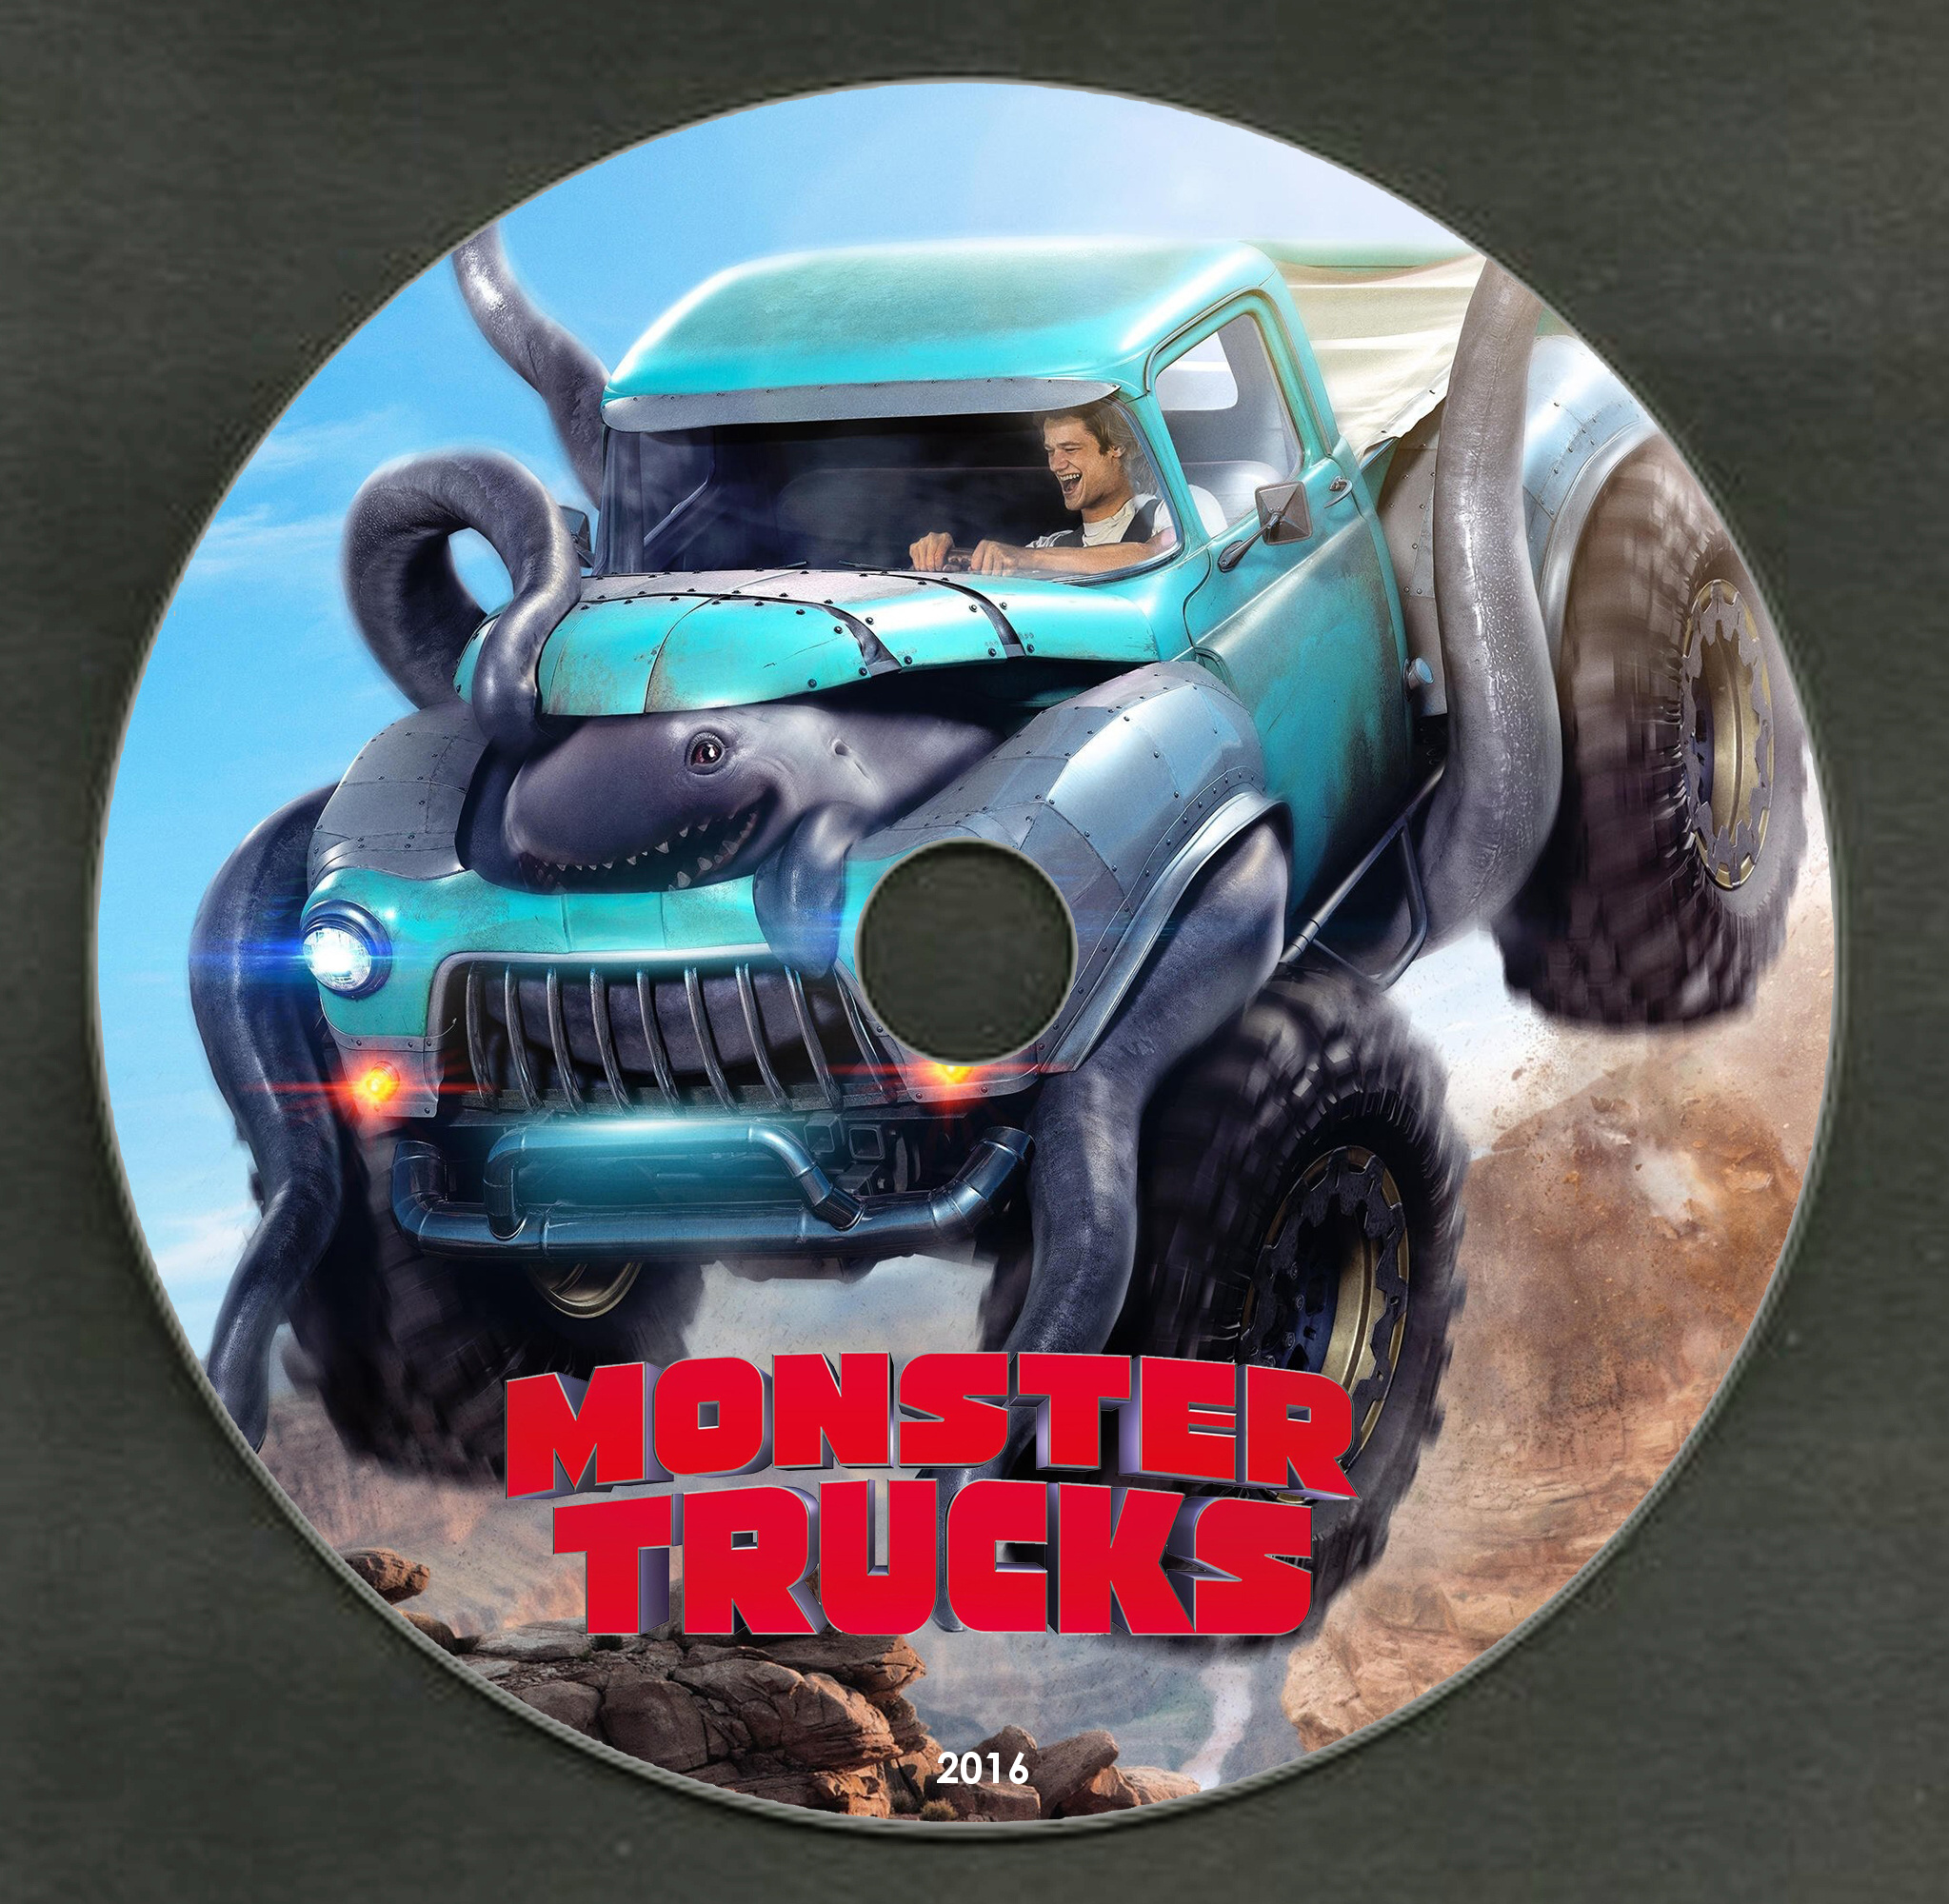 Get wheel-y excited. Monster Trucks Movie is now available on Blu